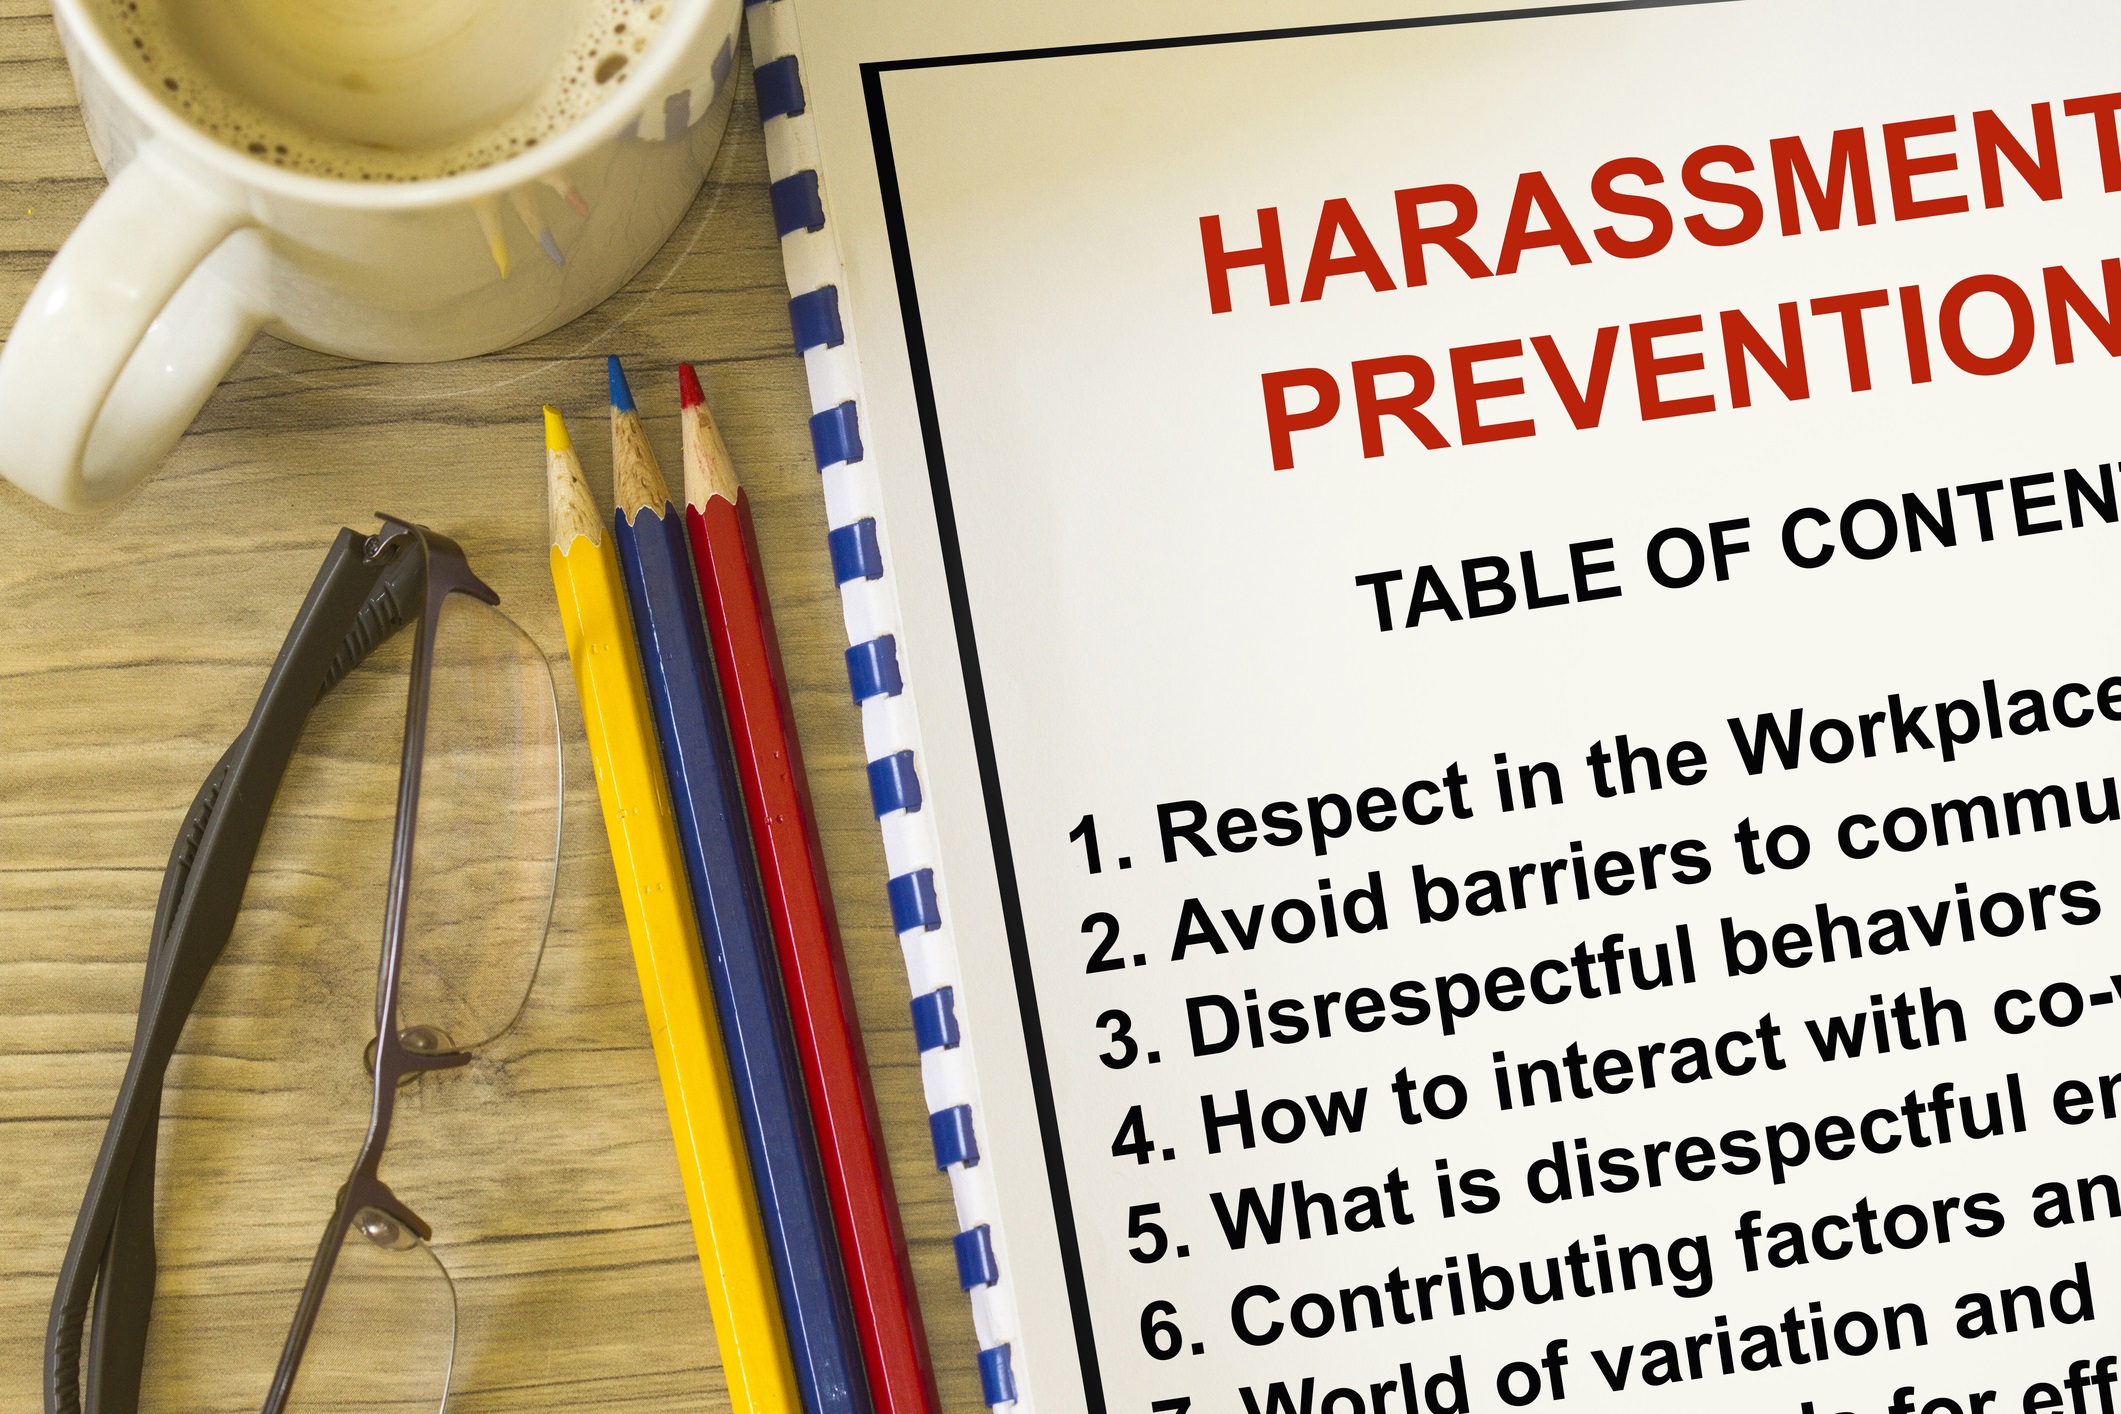 New York Passes Law Requiring Annual Sexual Harassment Prevention Training